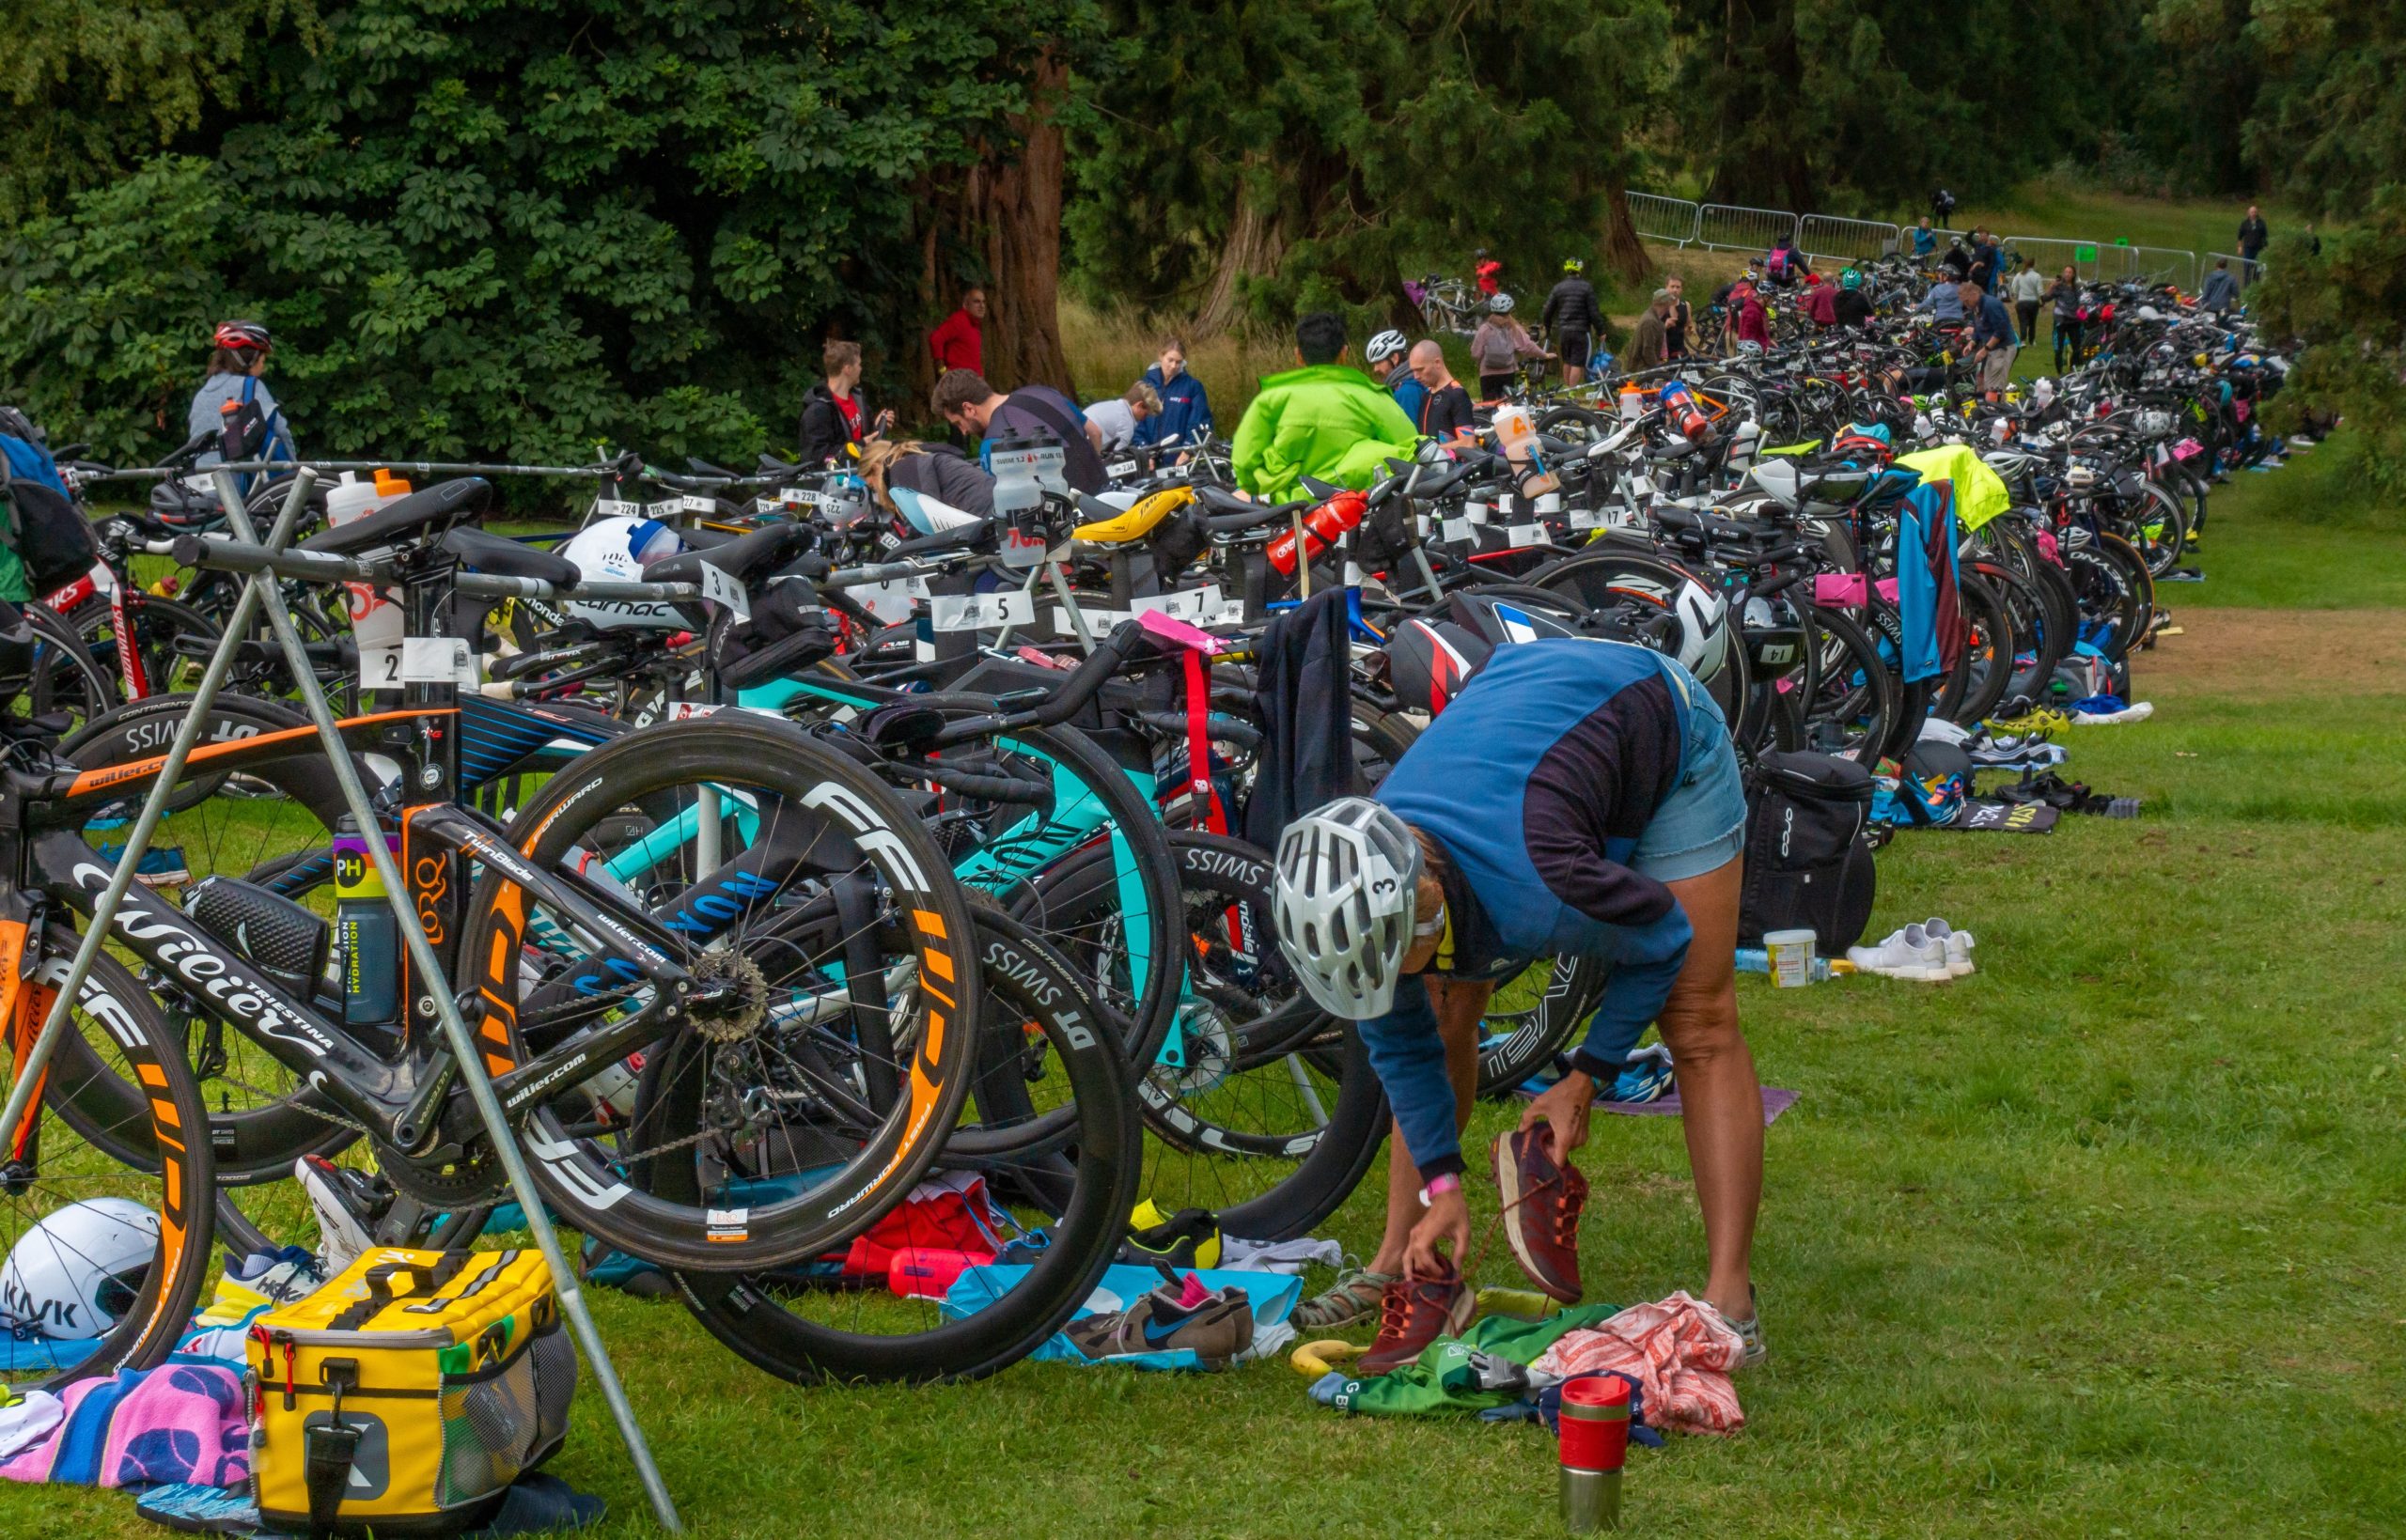 Set your triathlon transition game up for success: minimize time and maximize performance on race day.